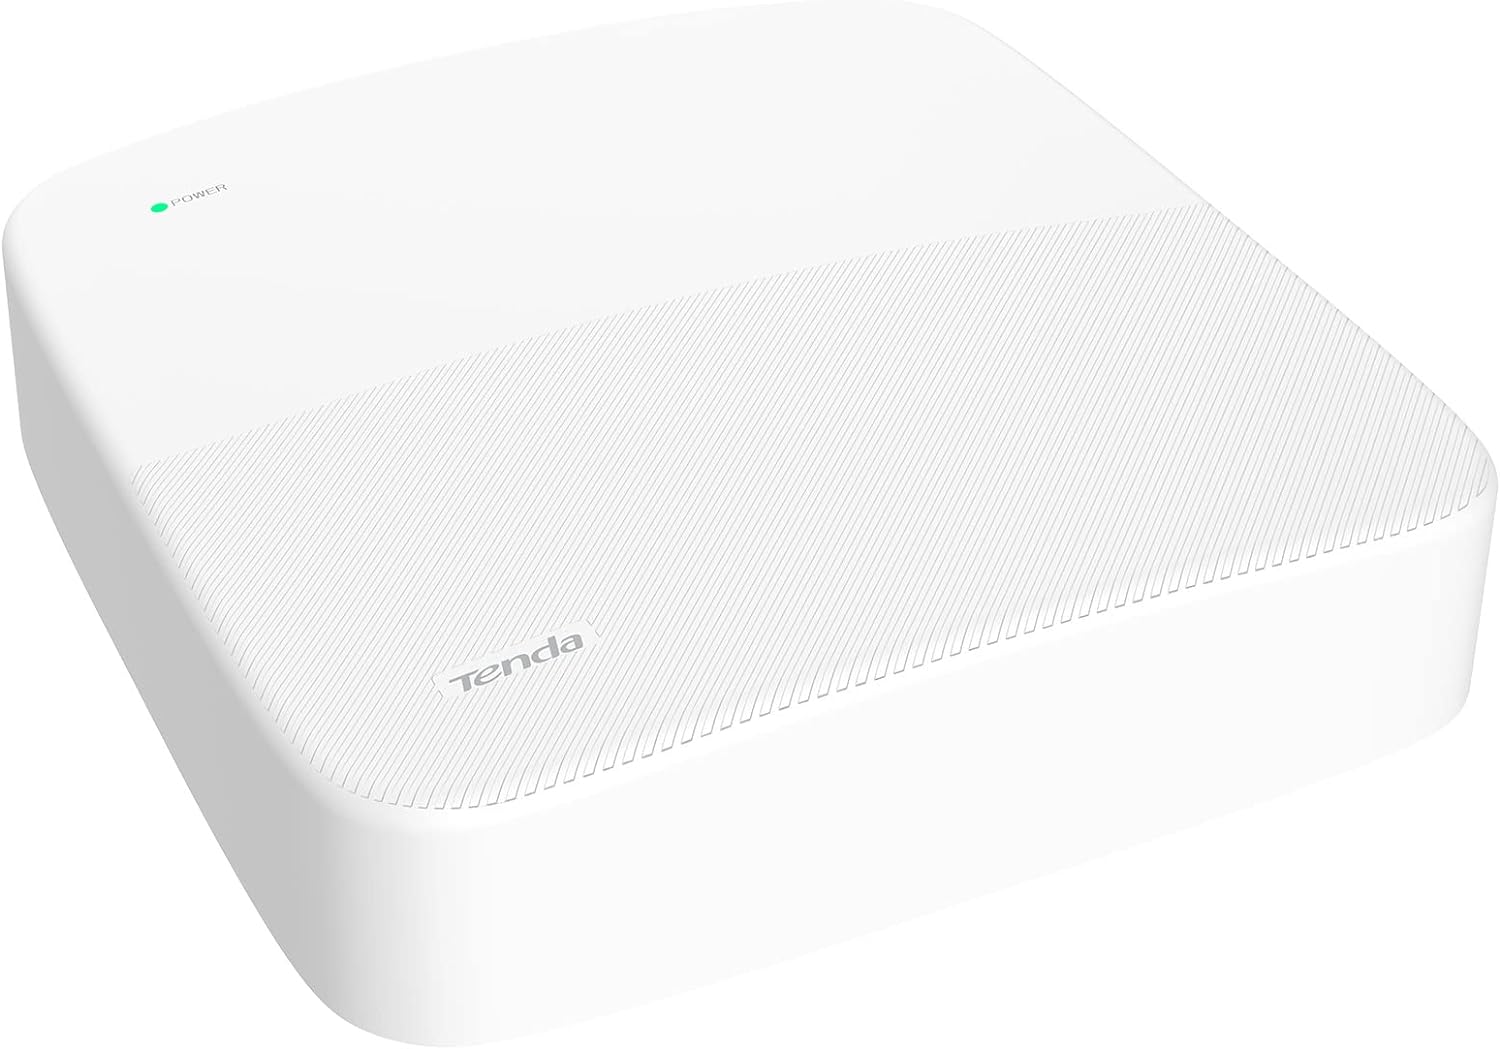 Tenda NVR N3L-8H 4K 8CH Network Video Recorder for Home Security Camera System, 1080p/3MP/4MP/5MP/8MP ONVIF NVR Recorders, H.265 Surveillance Video Recorders, Supports up to 10TB HDD (Not Included)